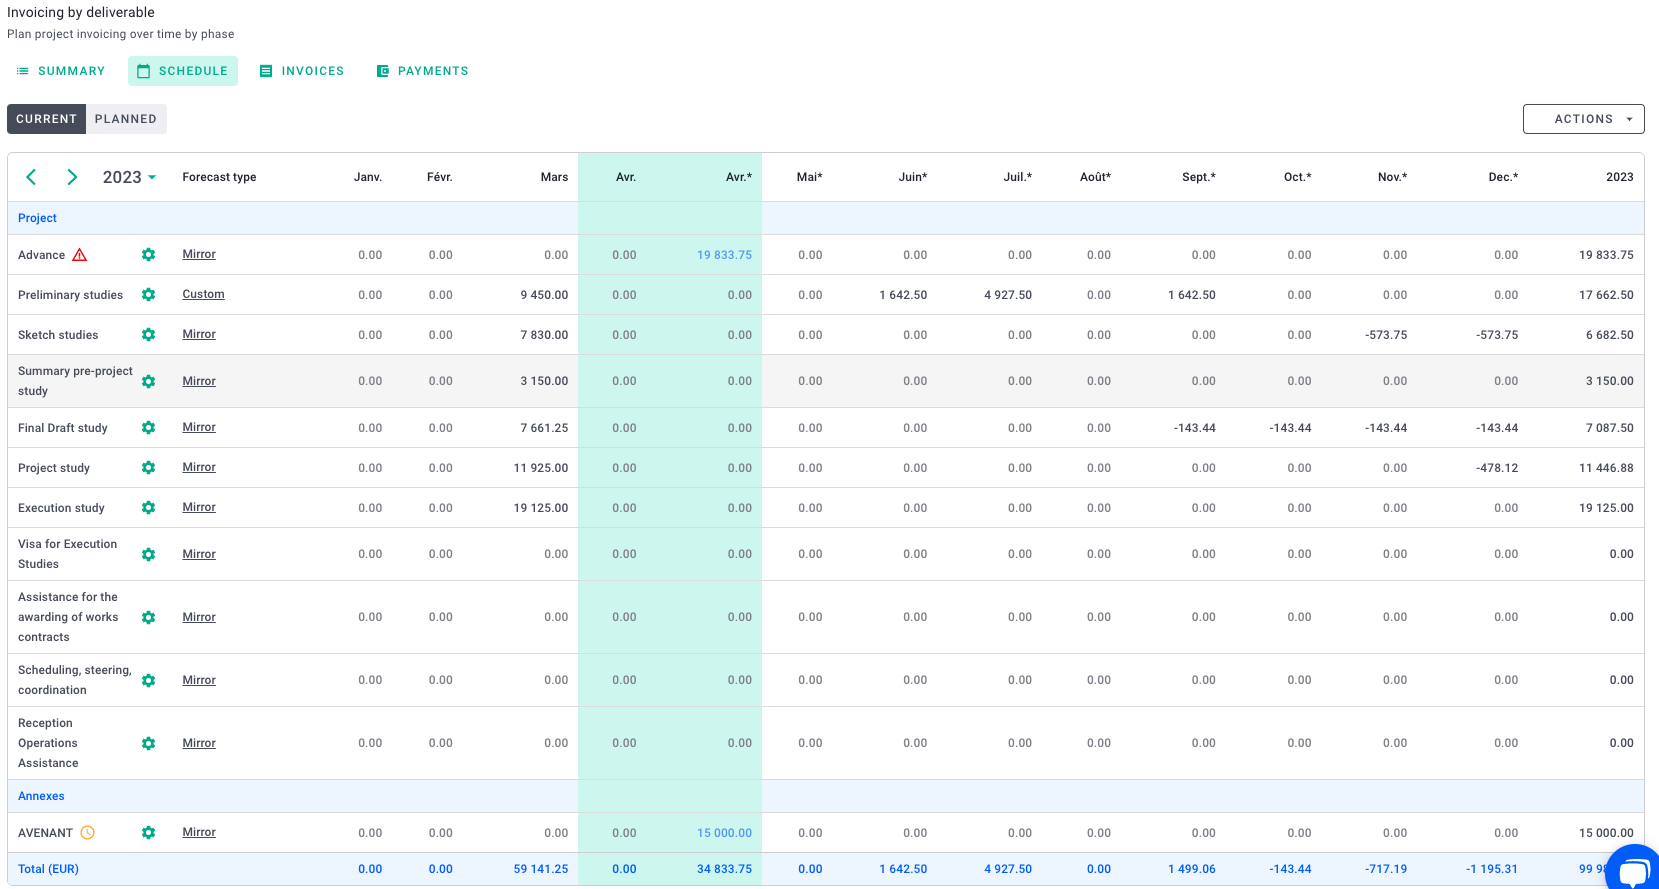 screen details by phases invoicing 